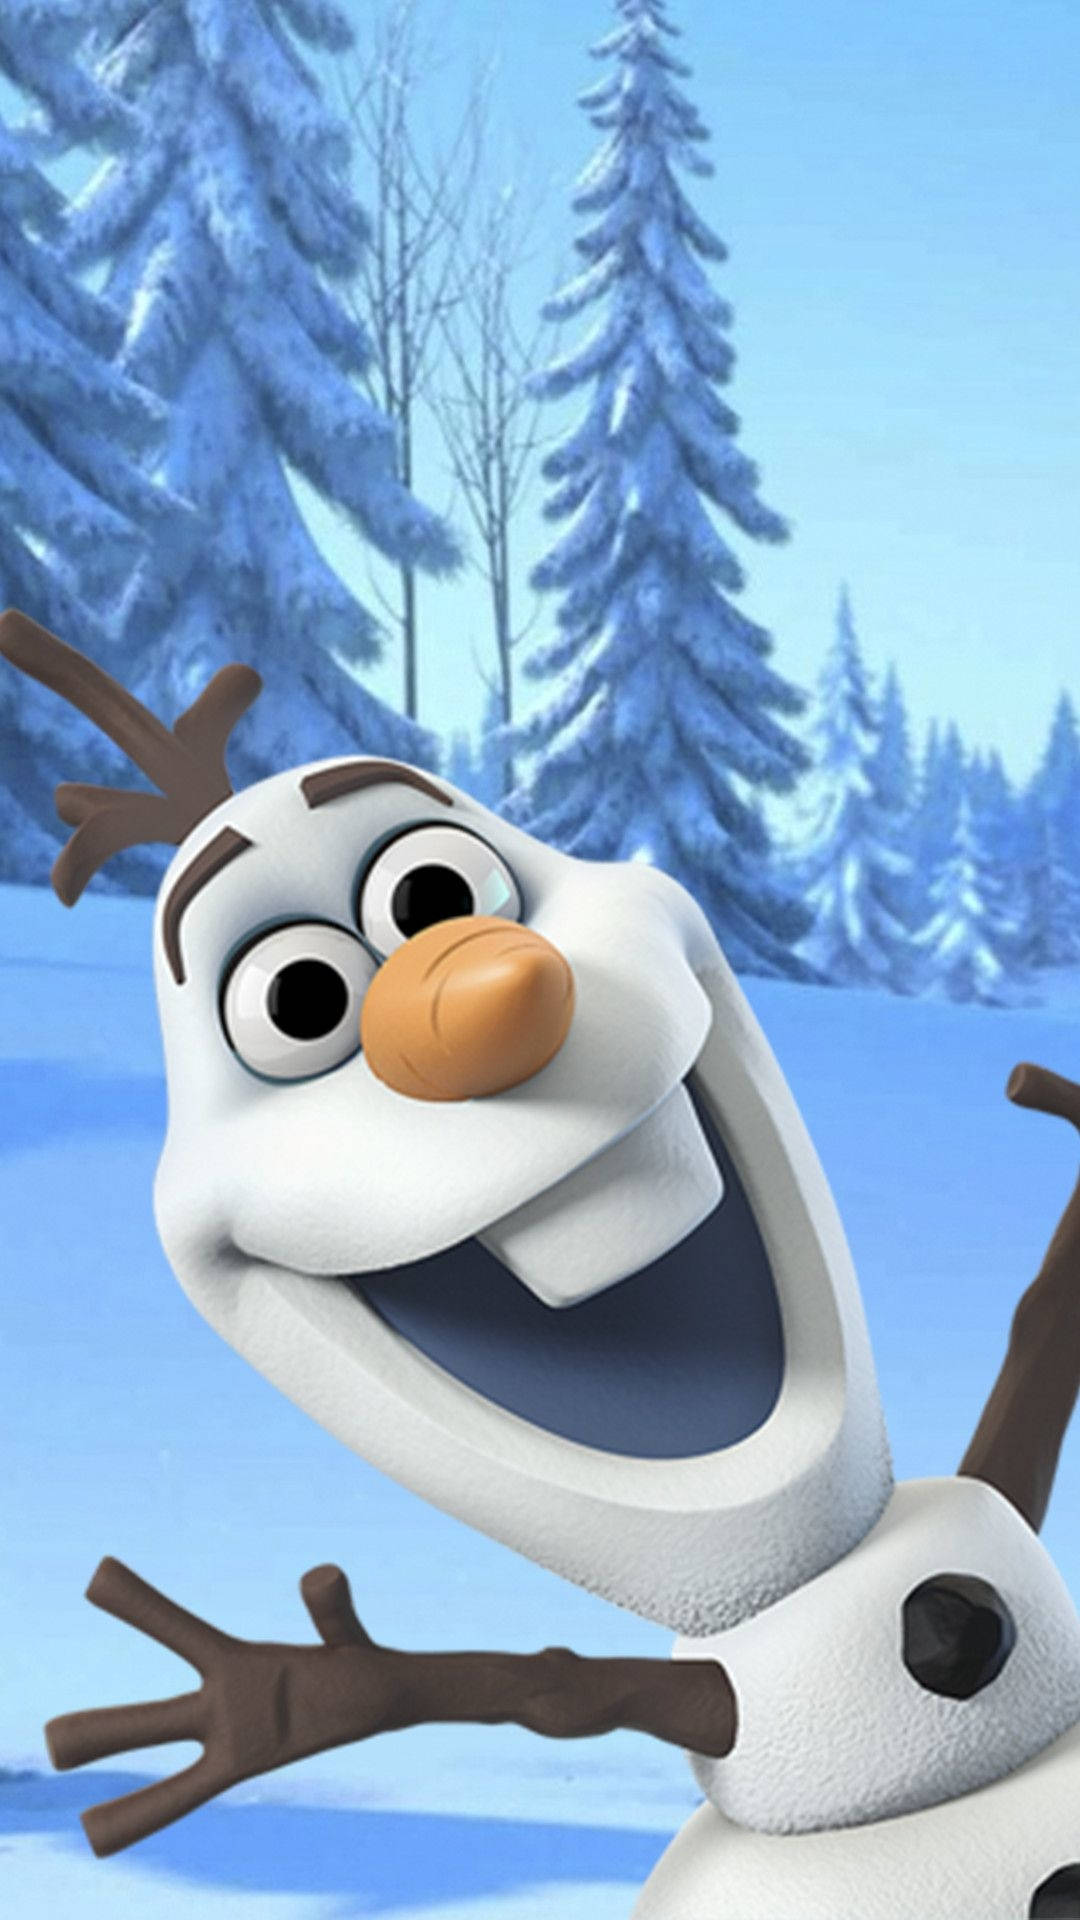 A cartoon character of frozen is standing in the snow - Olaf